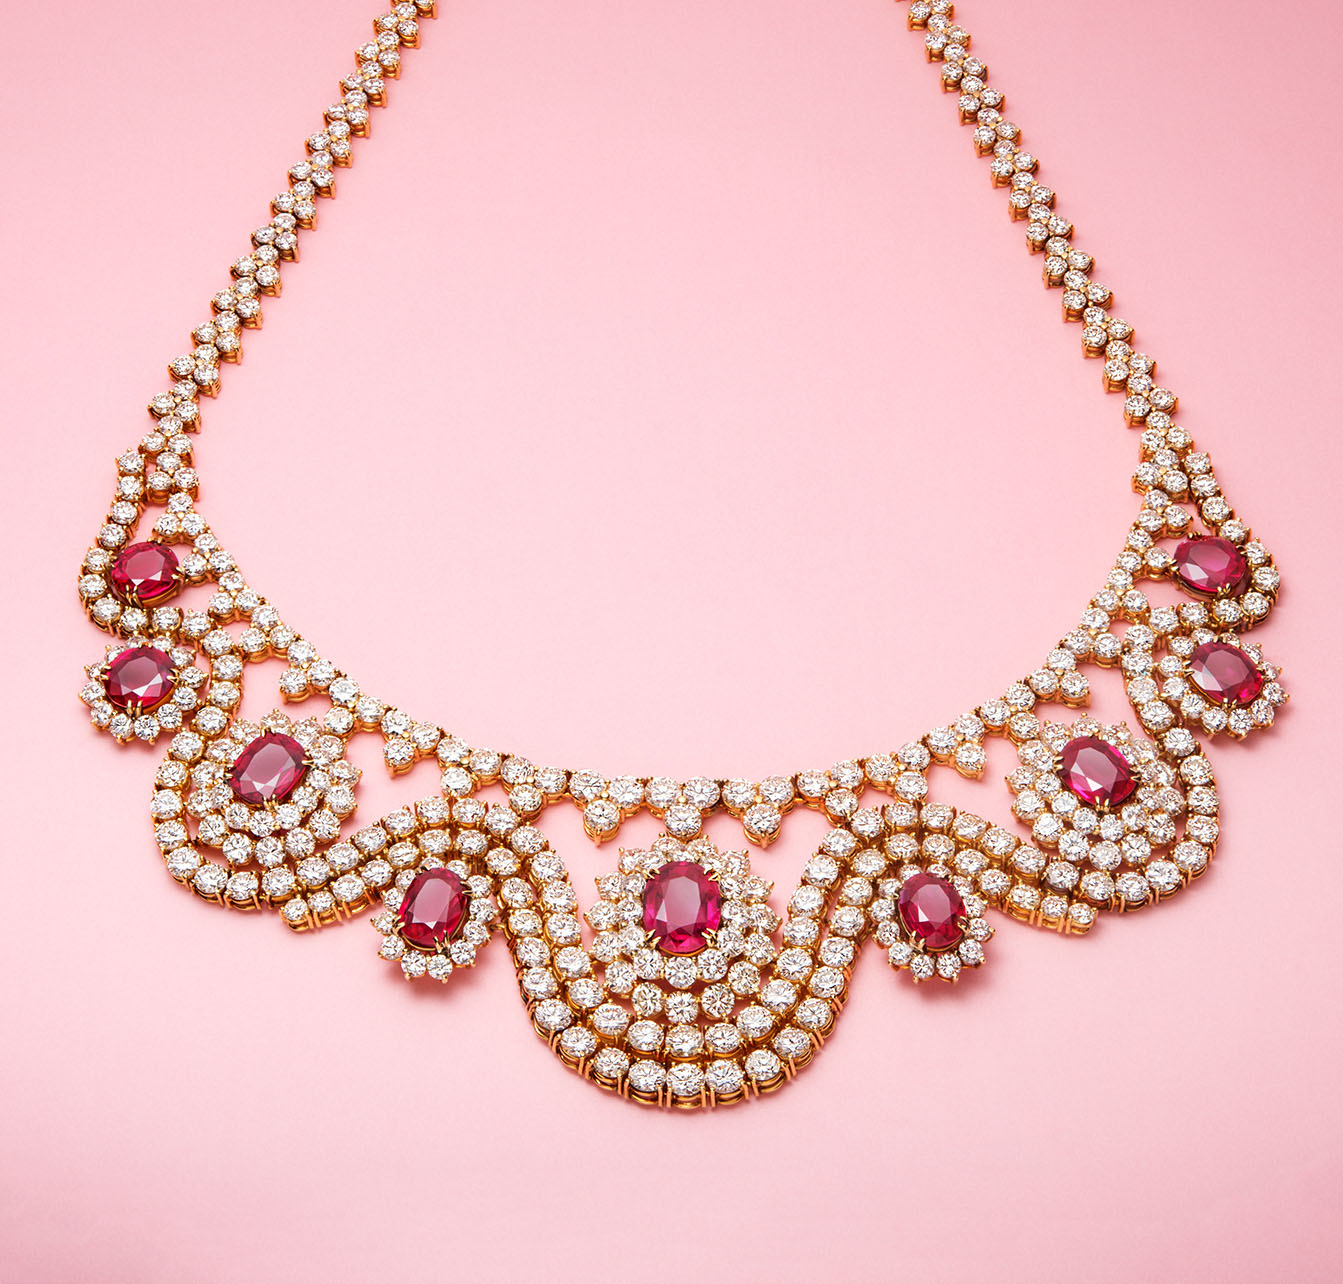 New-york-still-life-photography-necklace-with-gems